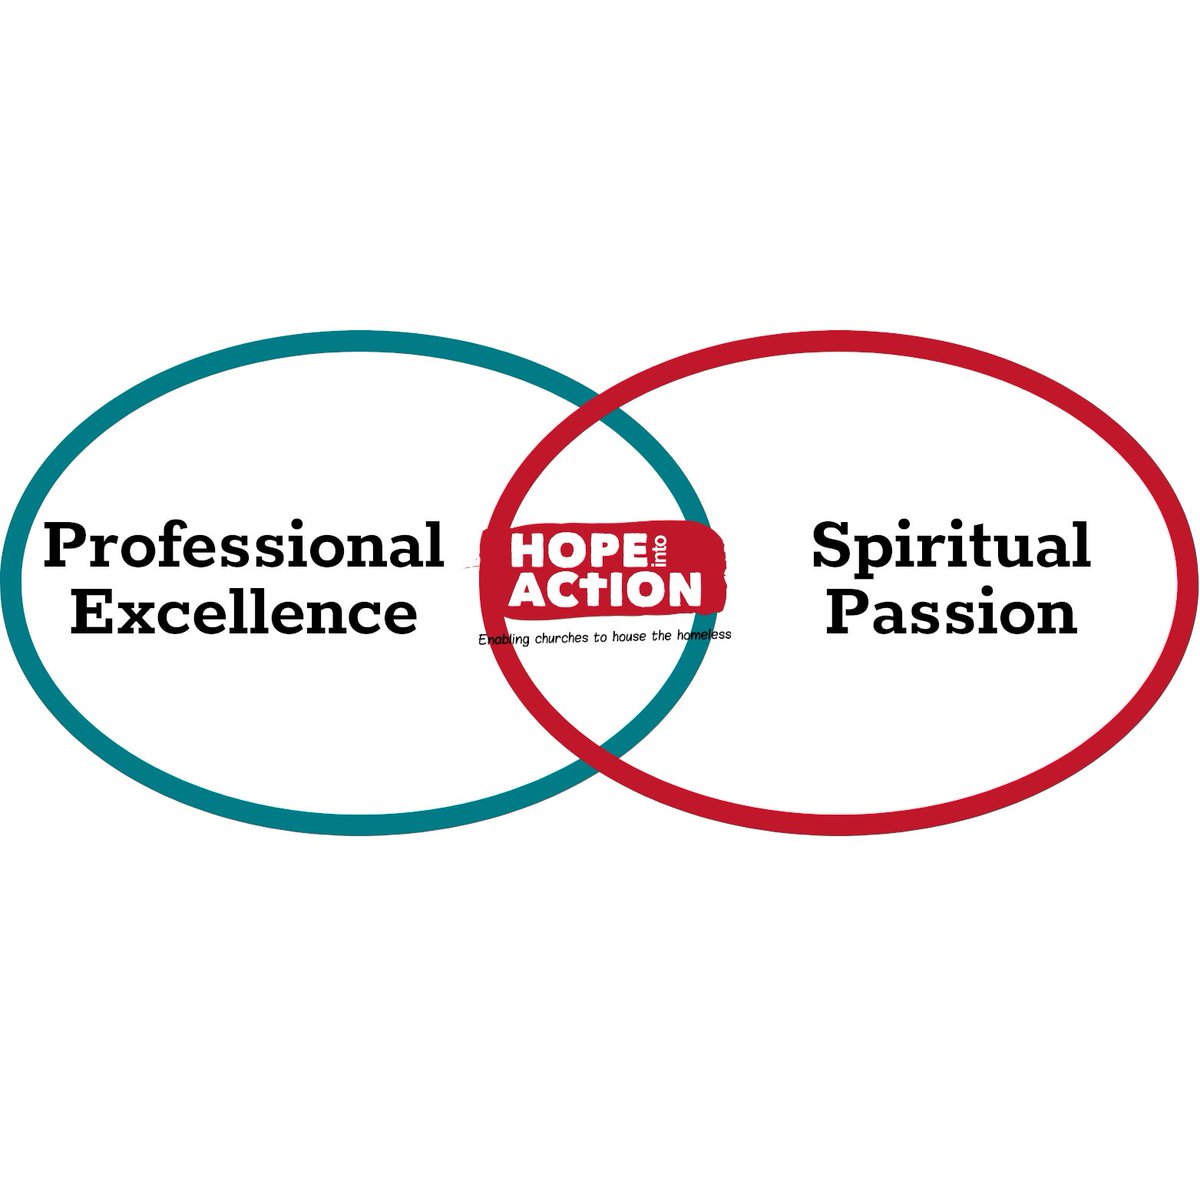 At Hope into Action, the heart of our strategy is deepening our commitment to combining professional excellence and spiritual passion. If you are passionate about enabling churches to show love to people experiencing homelessness and would like to join in please get in touch.